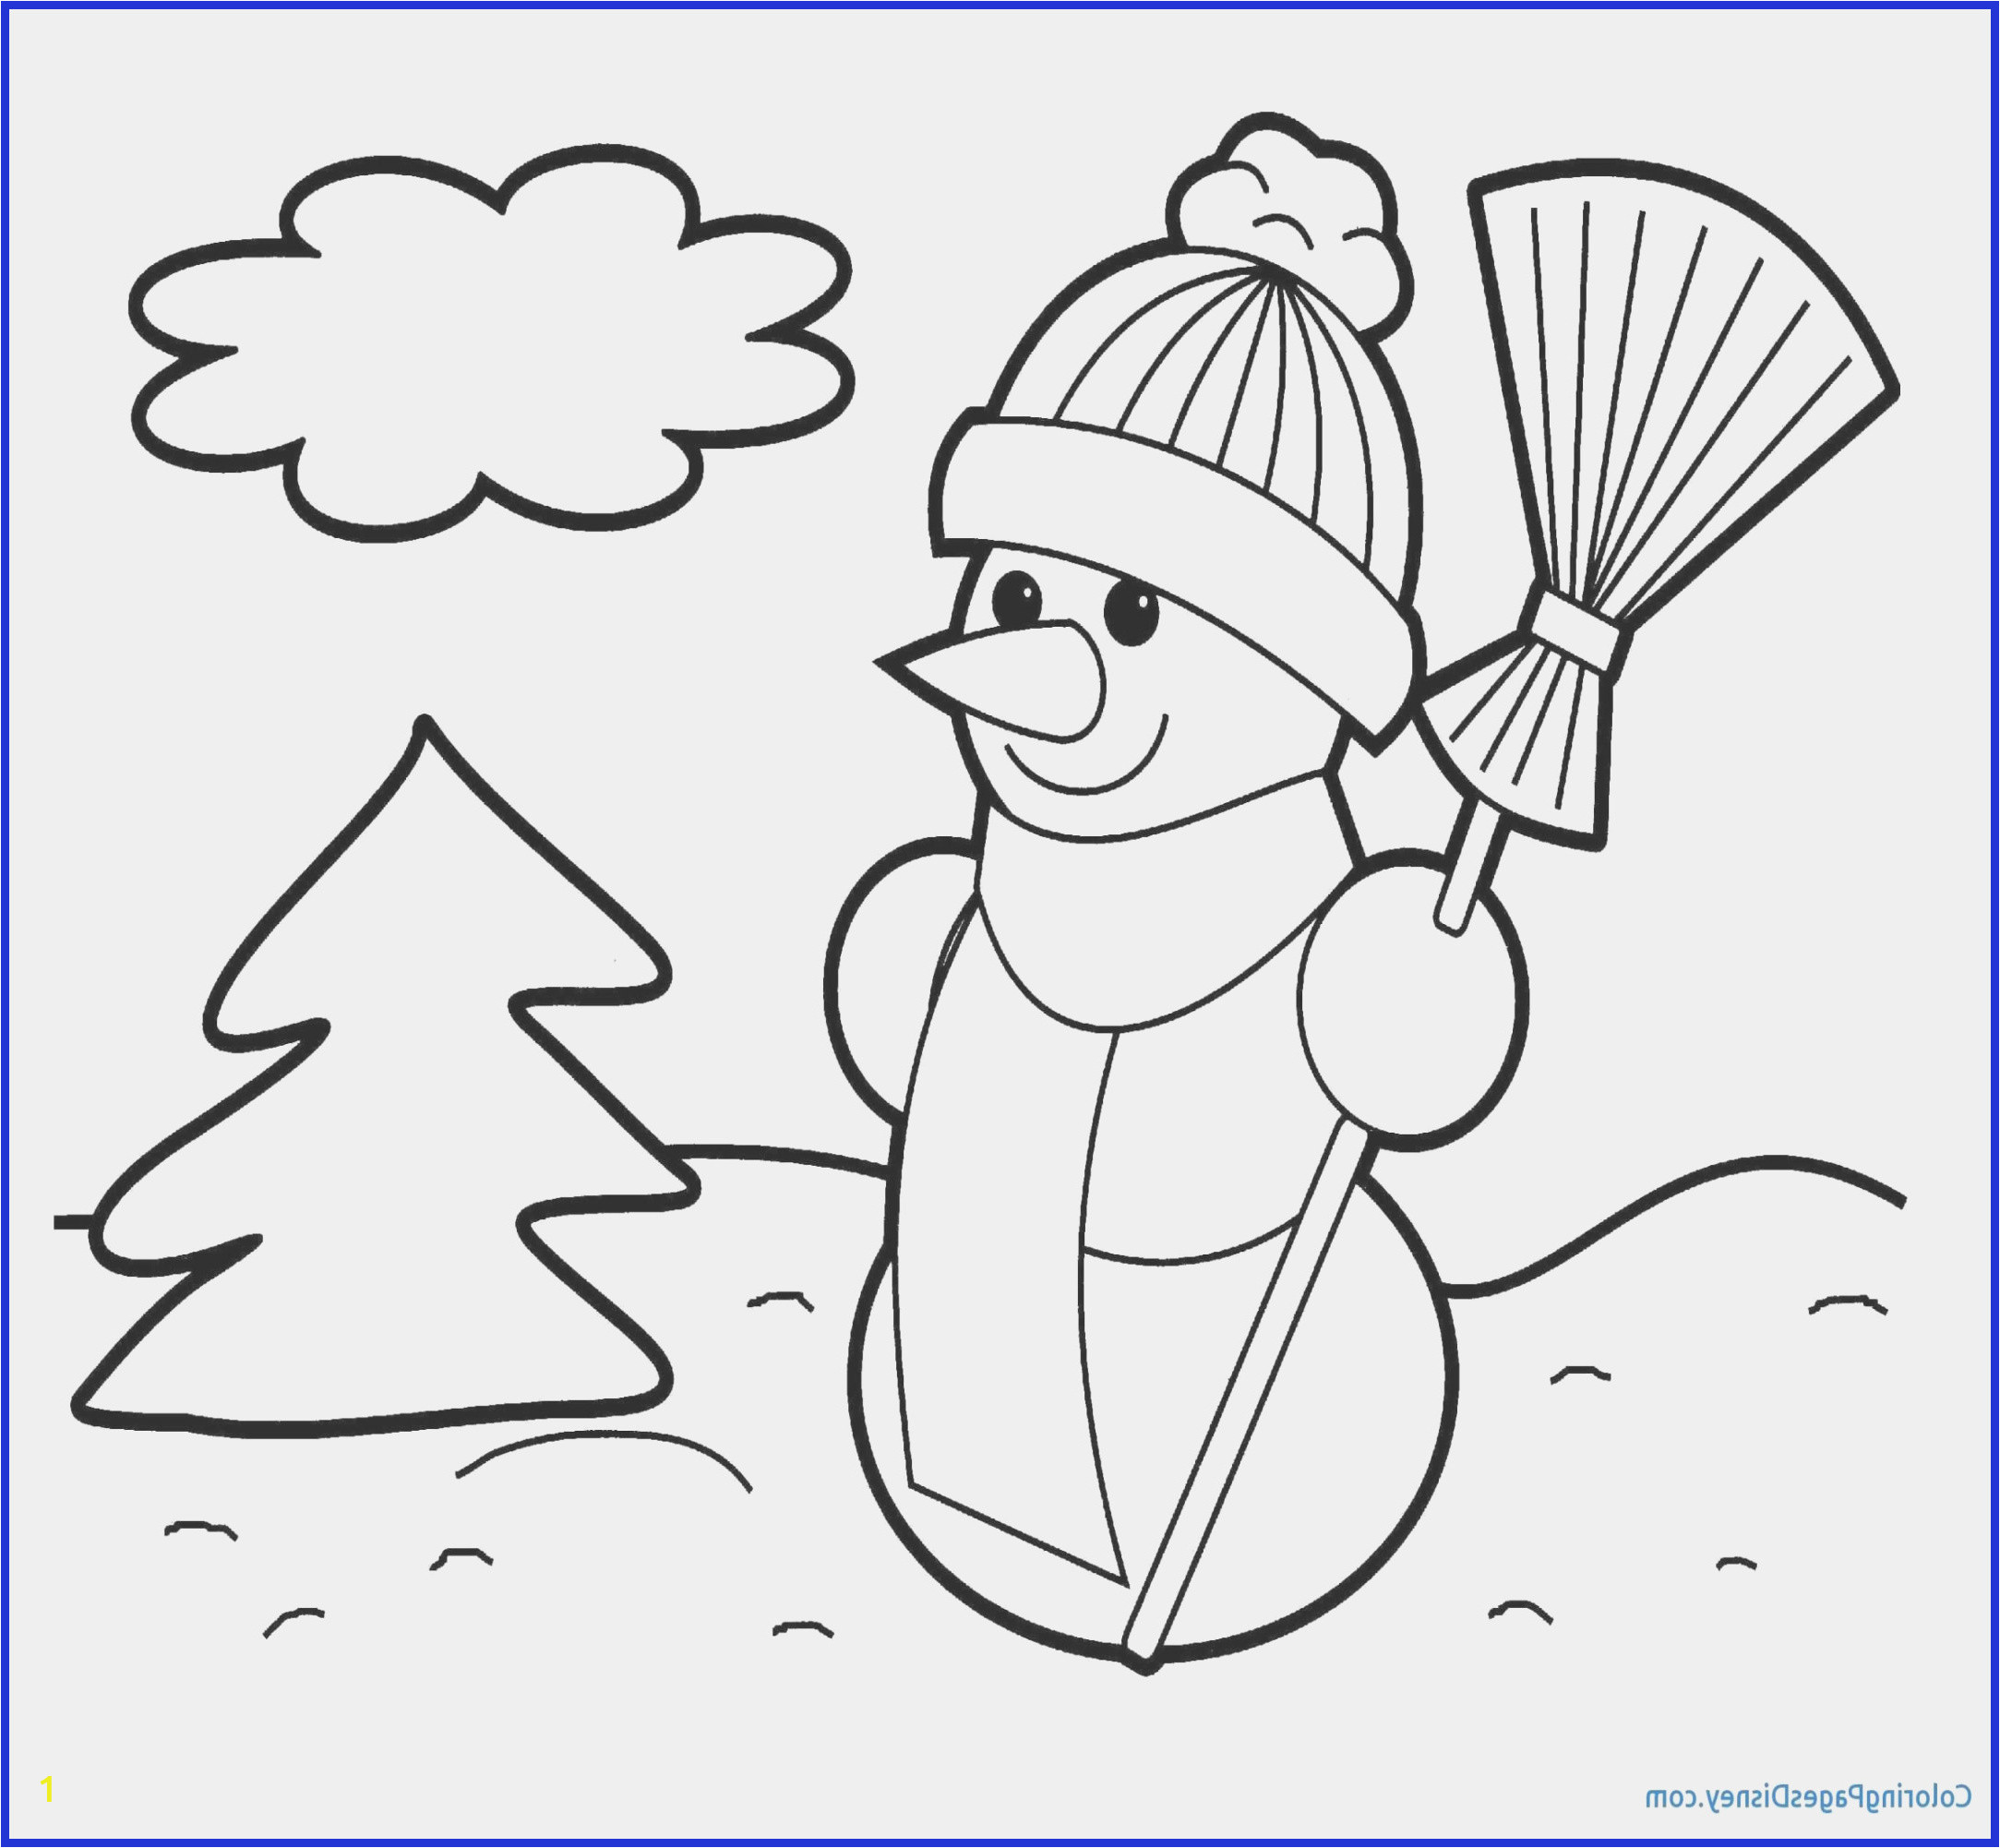 caterpillars coloring page best of photos flip flops coloring pages of caterpillars coloring page